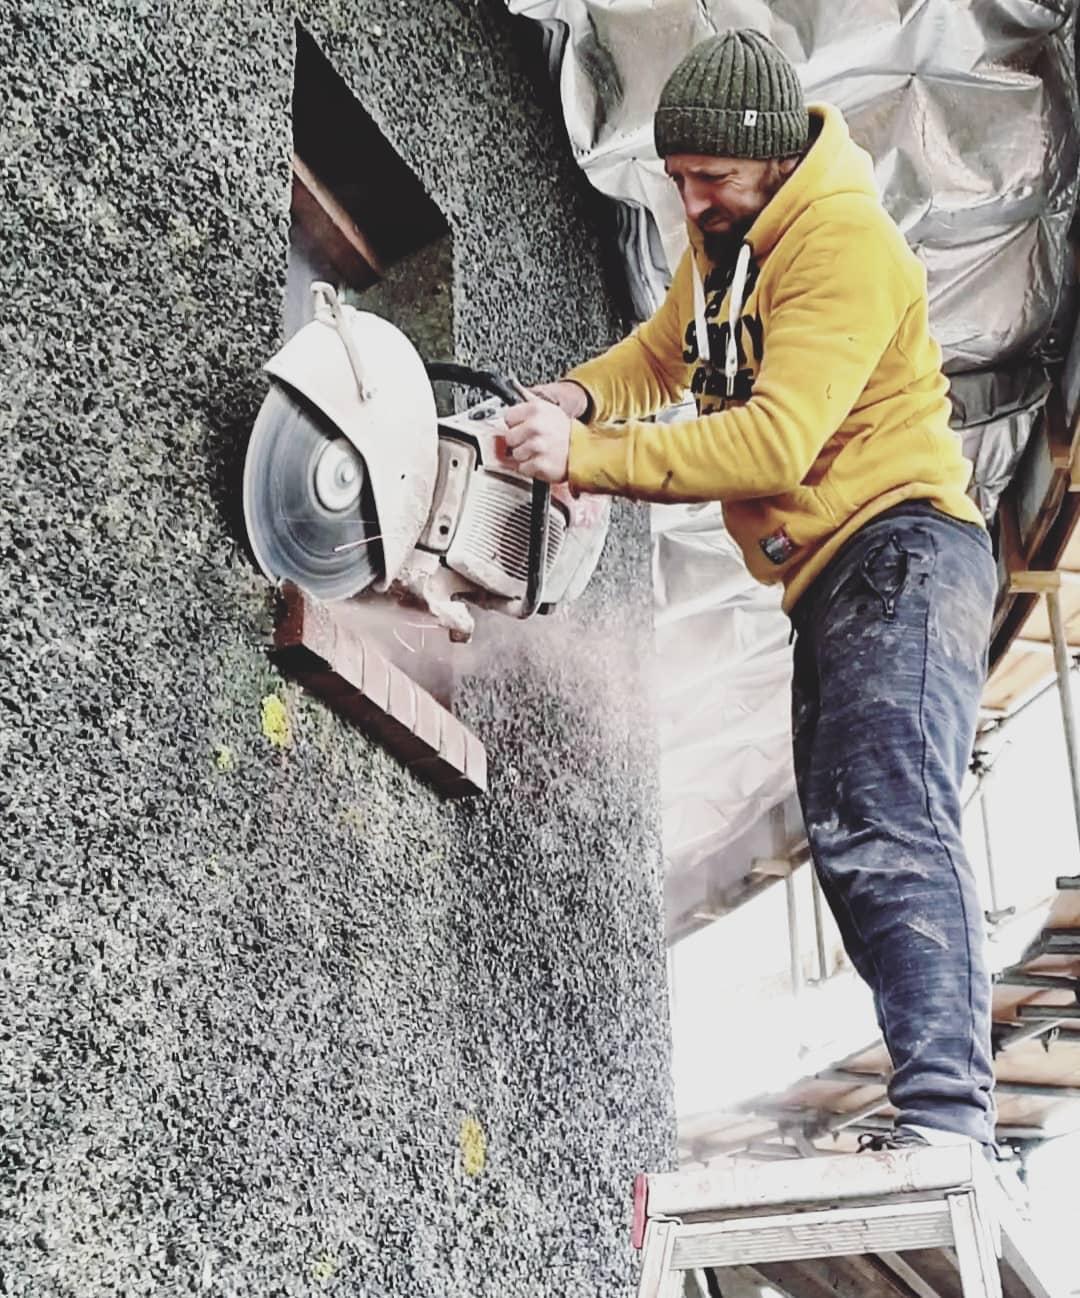 Rob Hunt working on the construction. (Courtesy of <a href="https://www.instagram.com/water_tower_conversion/">Rob Hunt</a>)